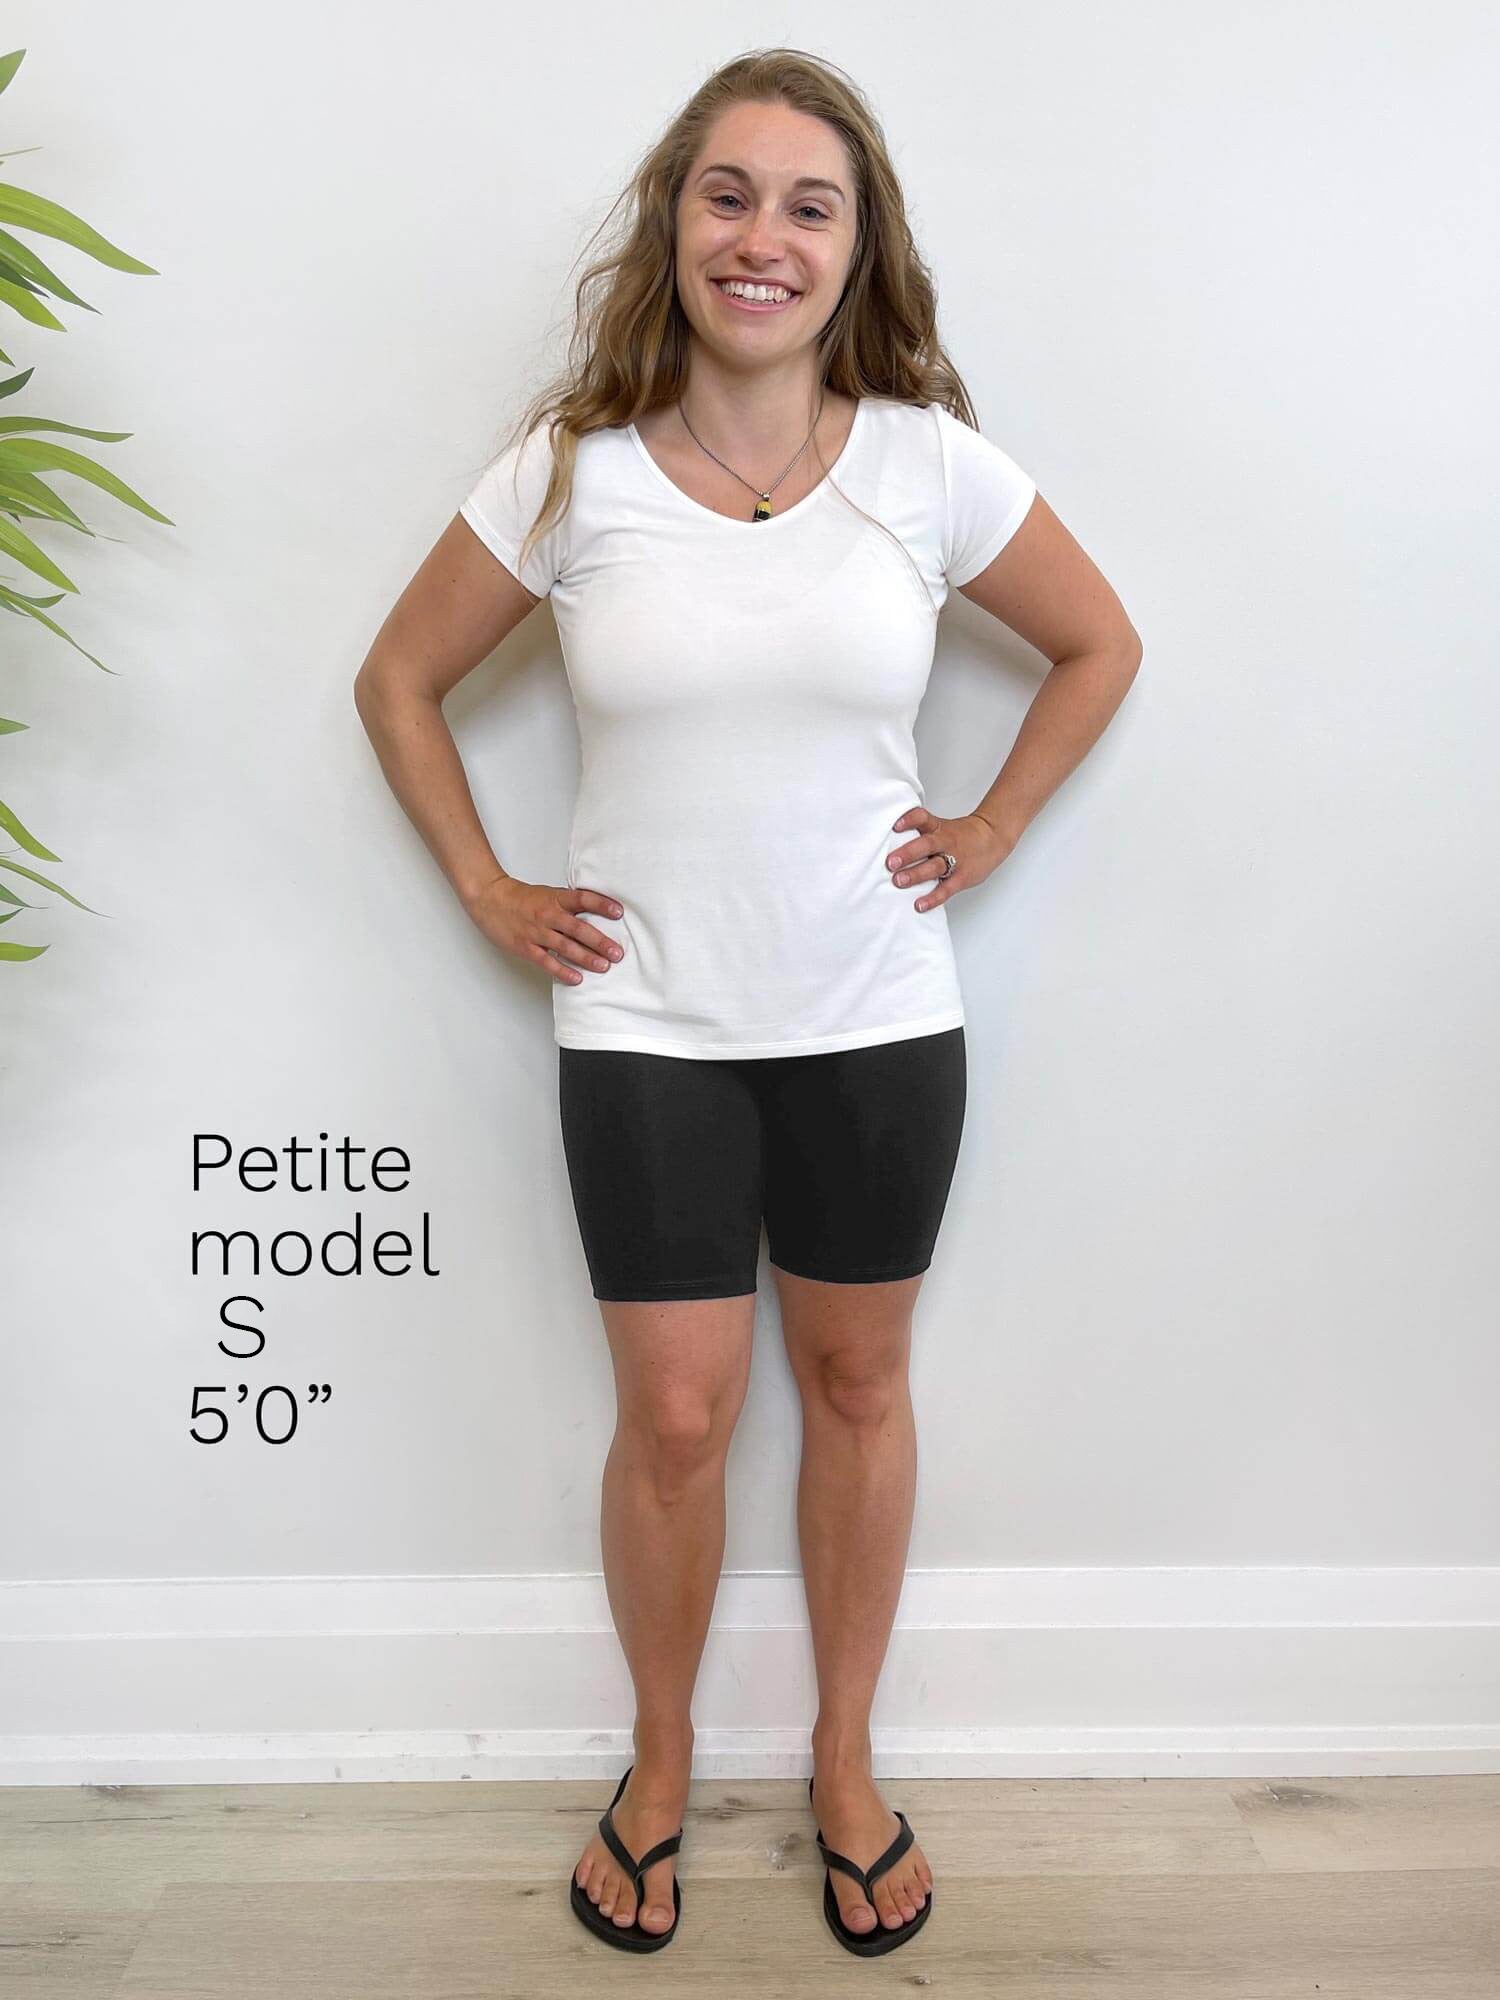 My Summer Uniform: Bike Shorts Styled 11 Ways  Shorts outfits women,  Summer outfits for moms, Casual outfits for moms